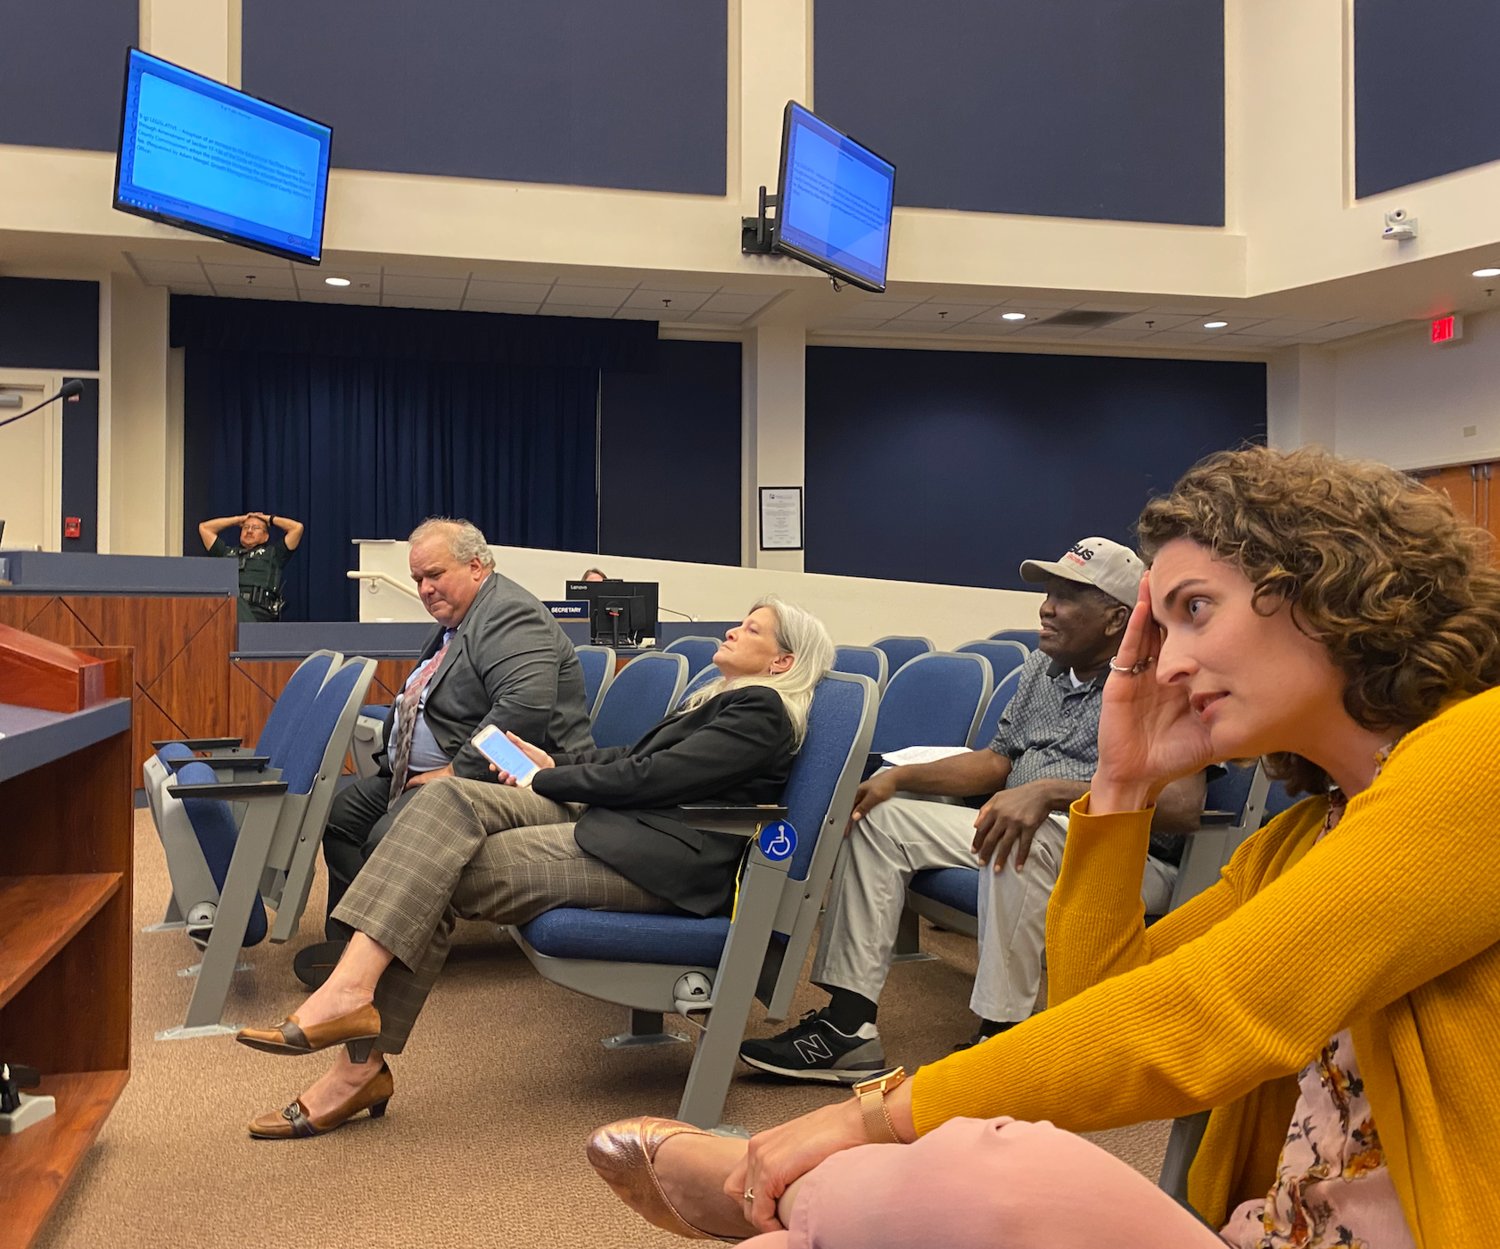 The meeting didn’t end until after 11:00 pm. L-R: Growth Management Director Adam Mengel, School Board Attorney Kristy Gavin, Palm Coast City Council candidate Sims Jones, and School Board candidate Courtney VandeBunte.